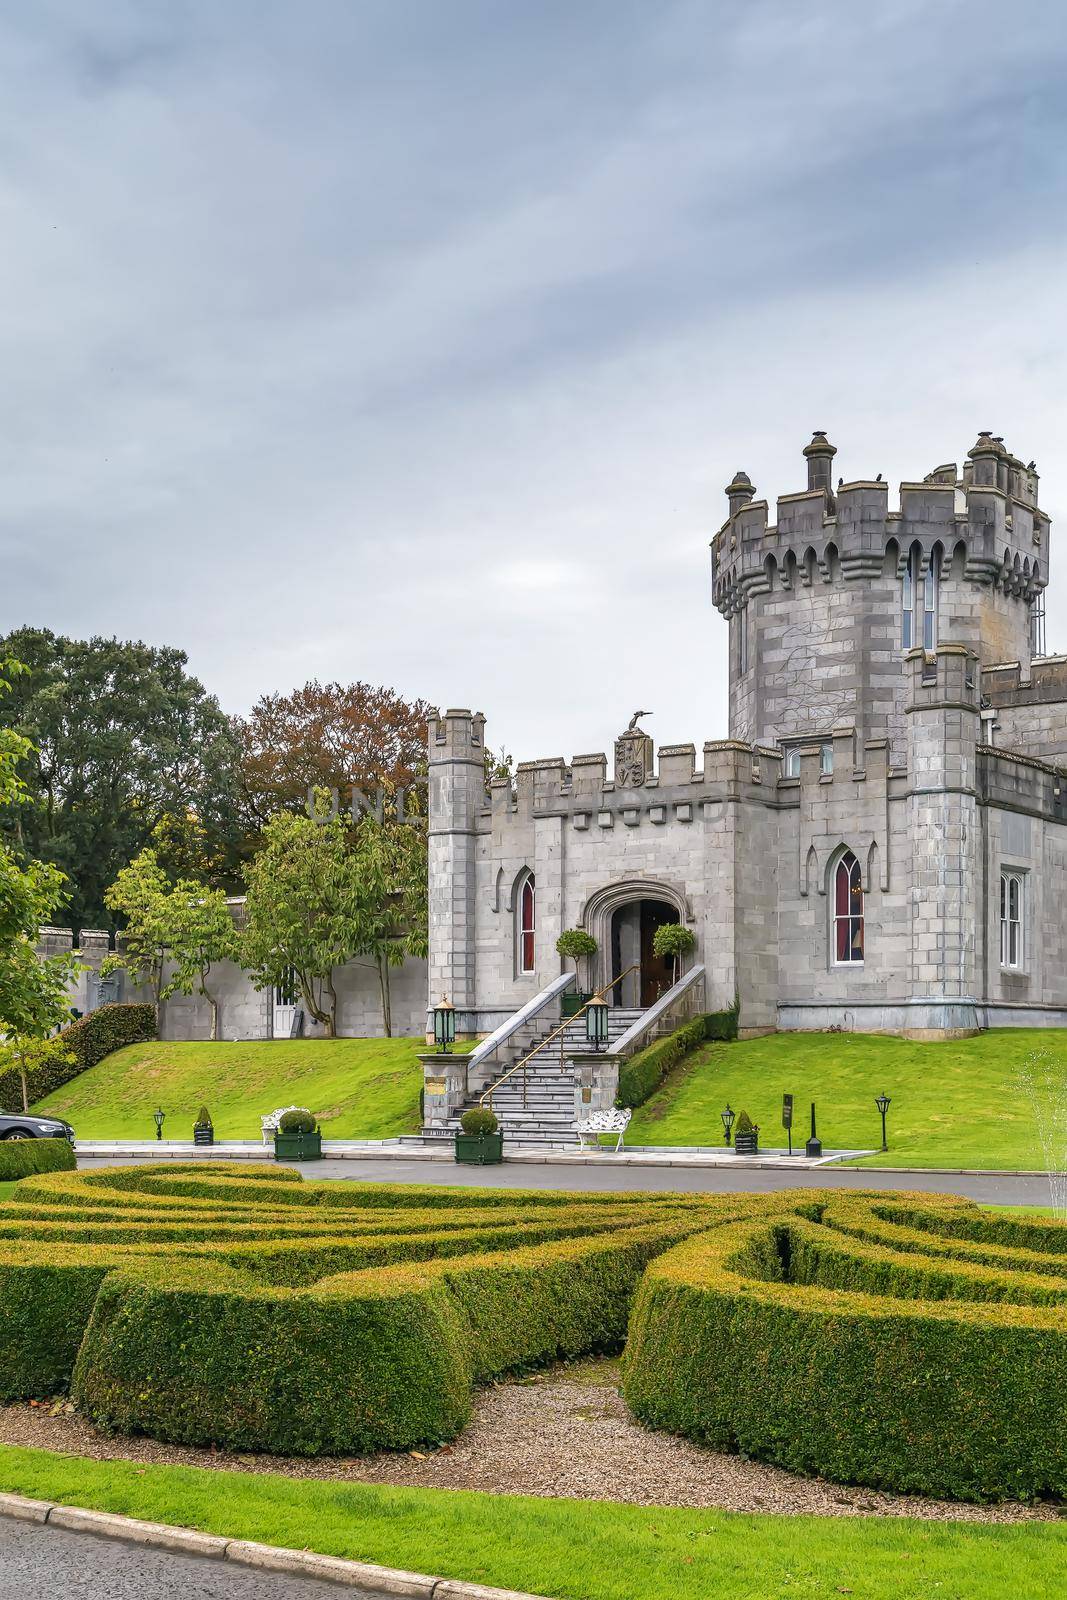 Dromoland Castle is a castle, located near Newmarket-on-Fergus in County Clare, Ireland